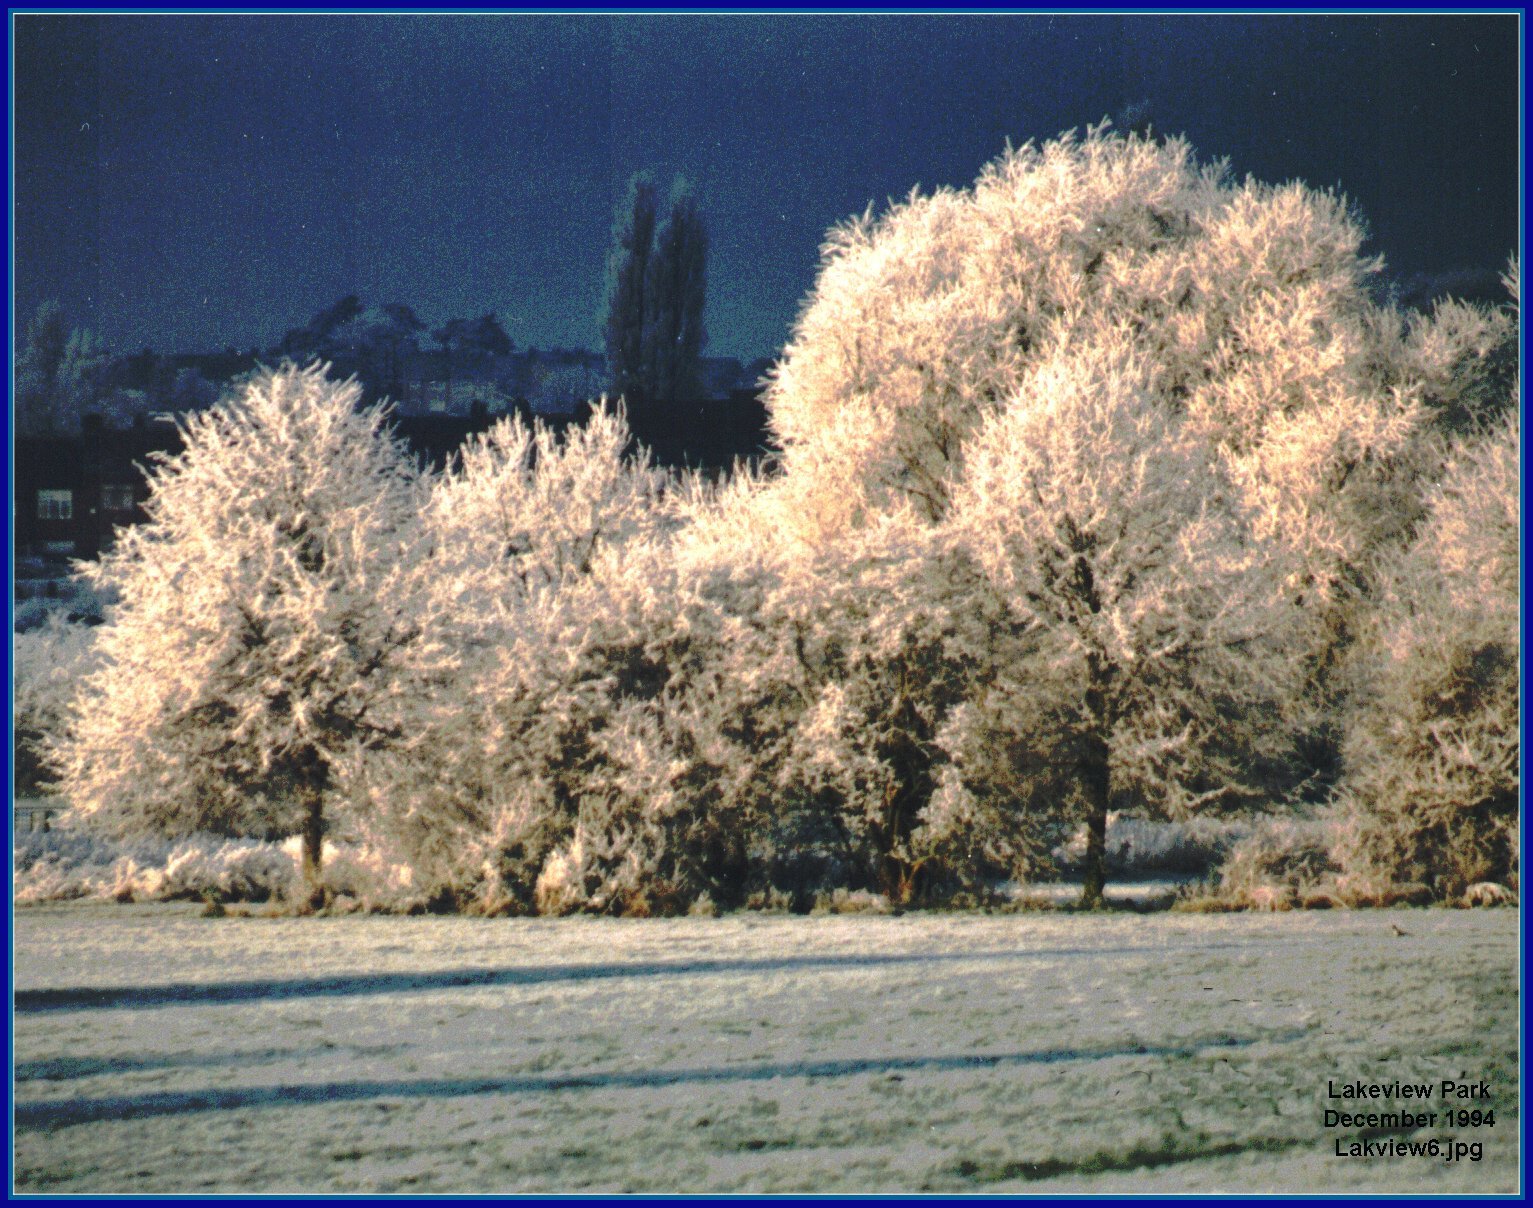 hoar frost on the trees